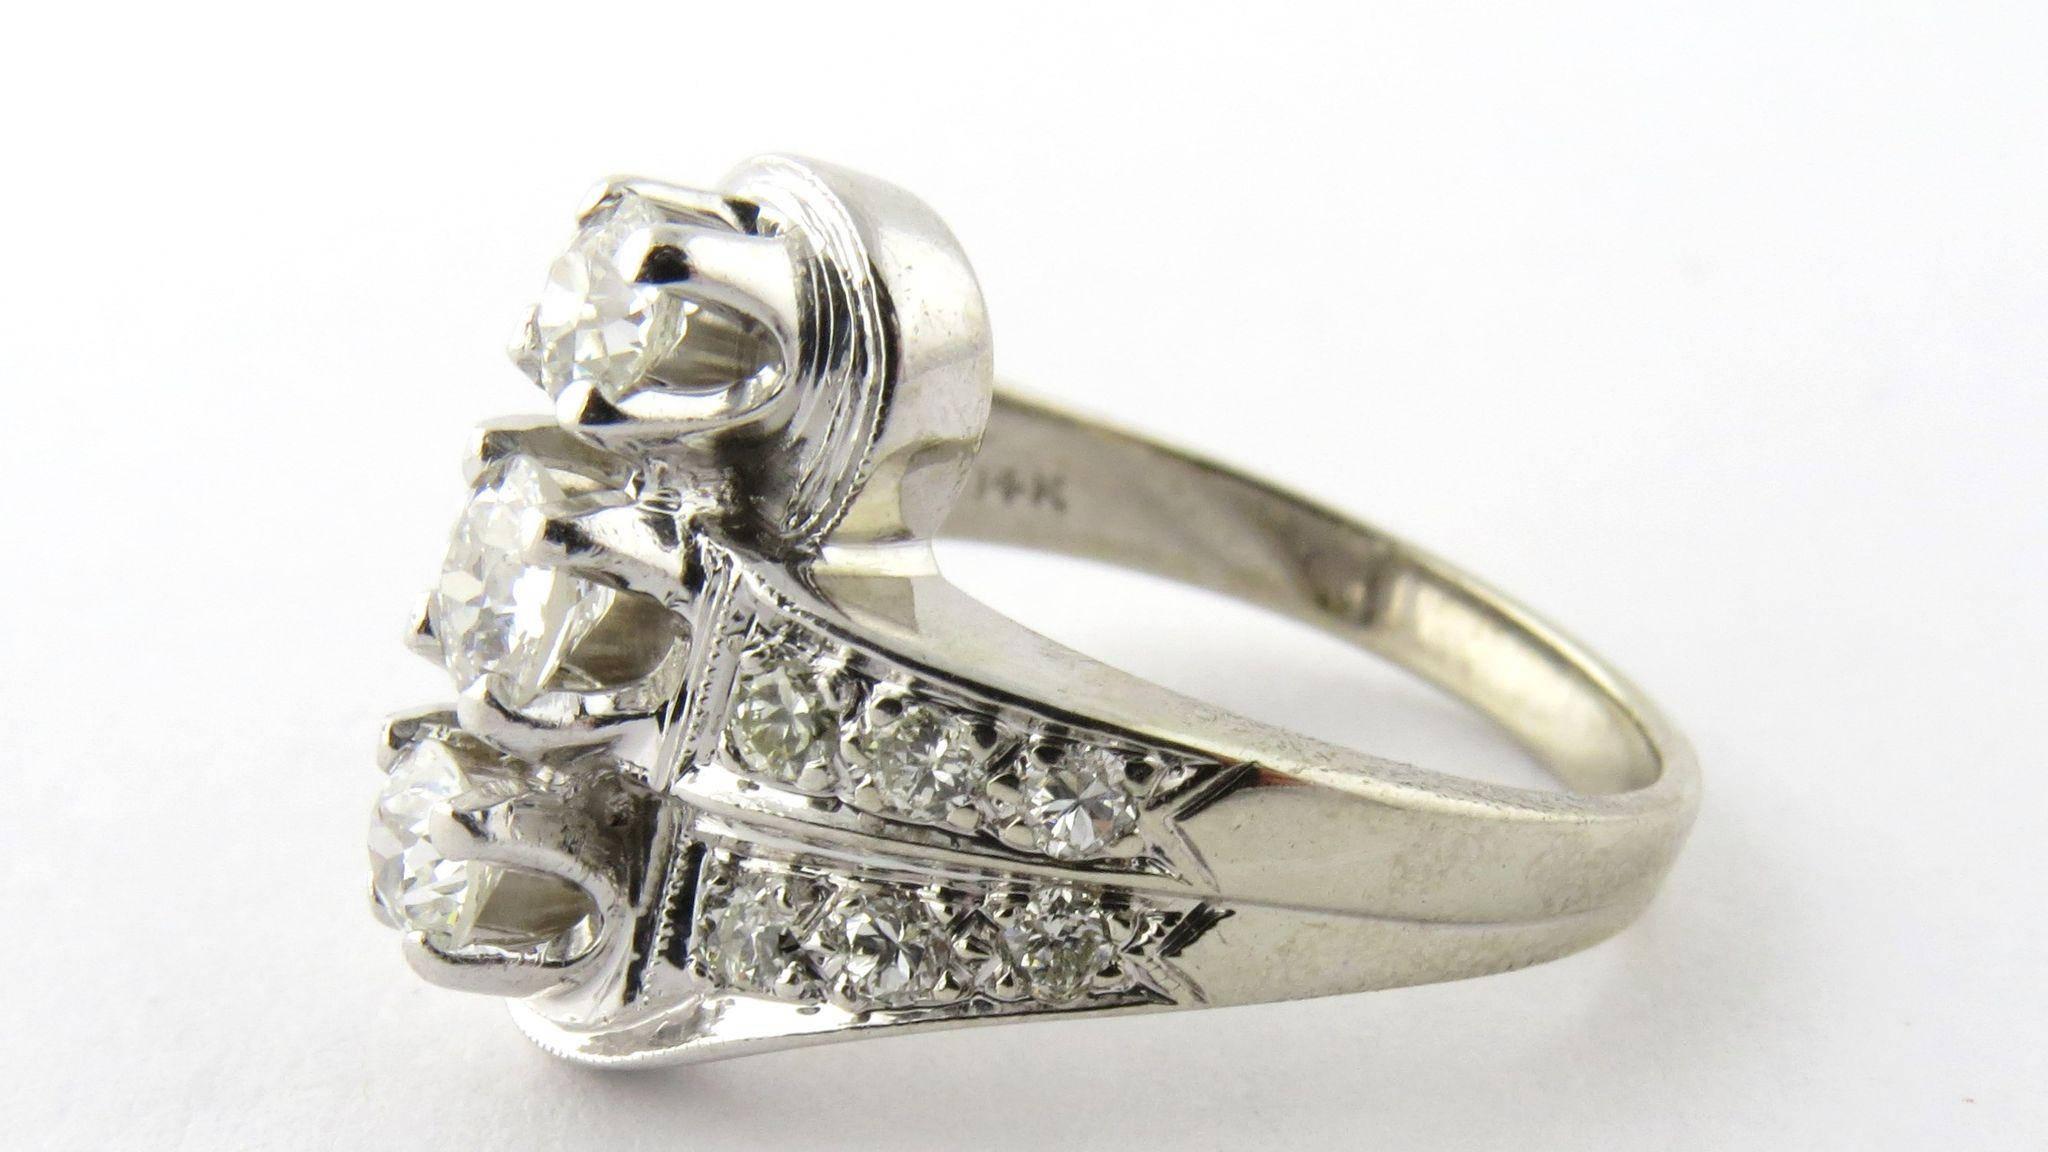 Vintage 14K White Gold 3 Stone Center Row Diamond Ring. 

3 pronged set lovely diamonds set in a top row with 2 side diamond bands on each side totaling 12 diamonds. 

Approximate total diamond weight 1.33ct. 

Size 7 1/4 6.5g, 4.15dwt Measures: